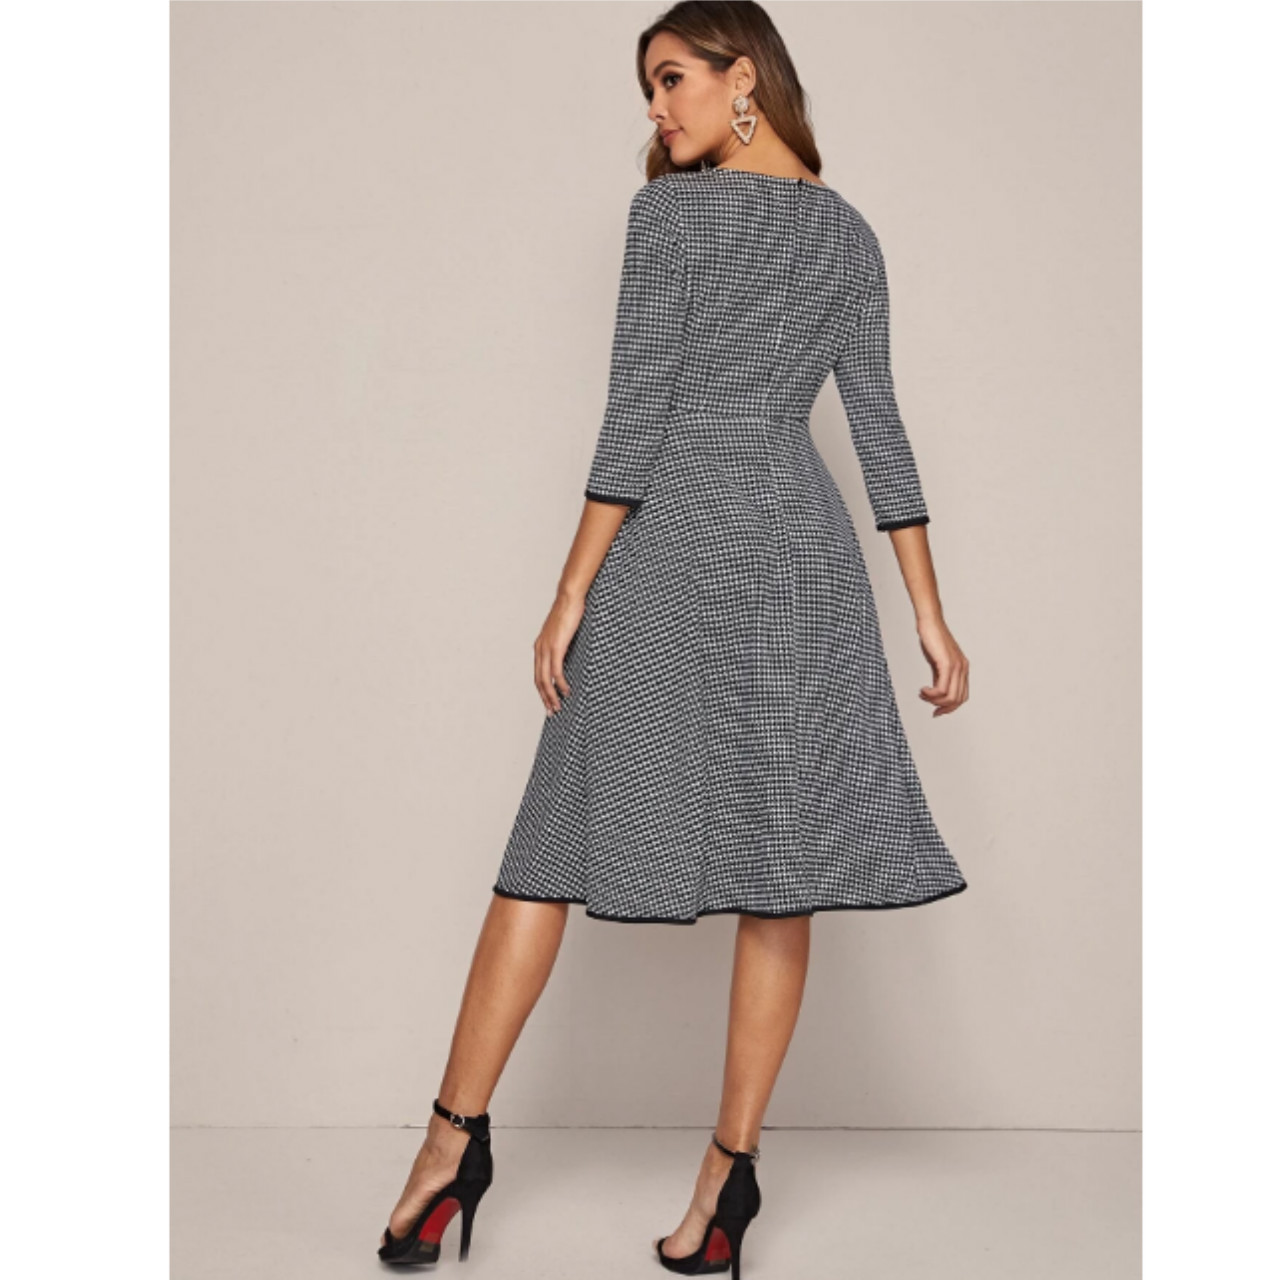 Binding detail houndstooth fit & flare dress l